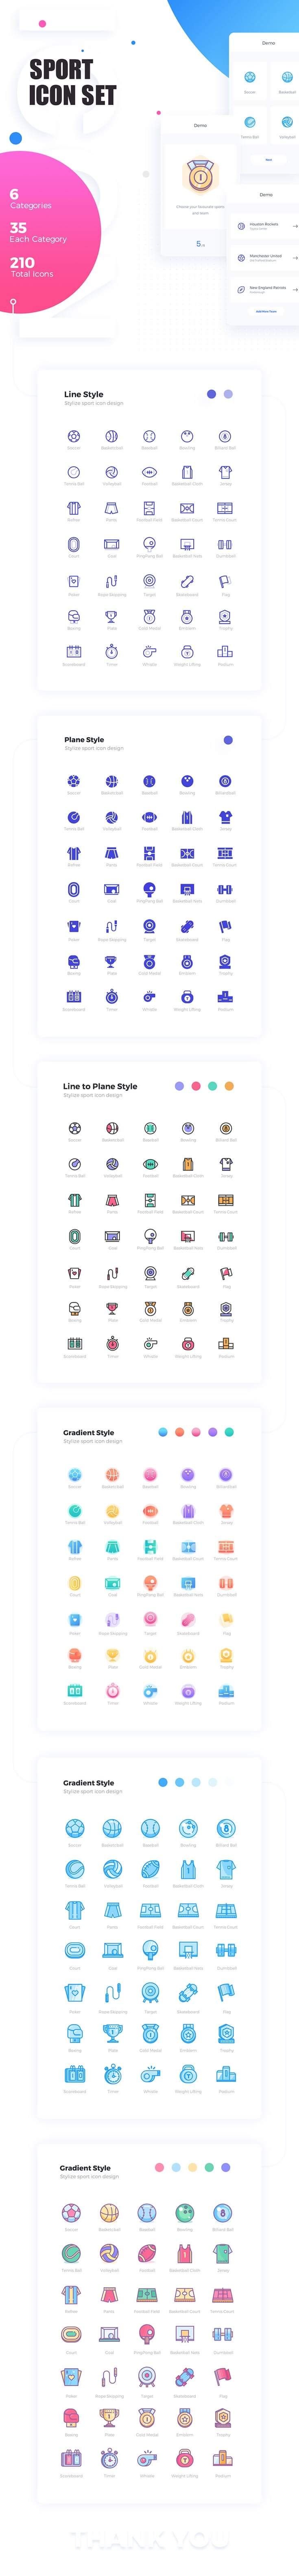 210 Free Sport Icons Set Pack